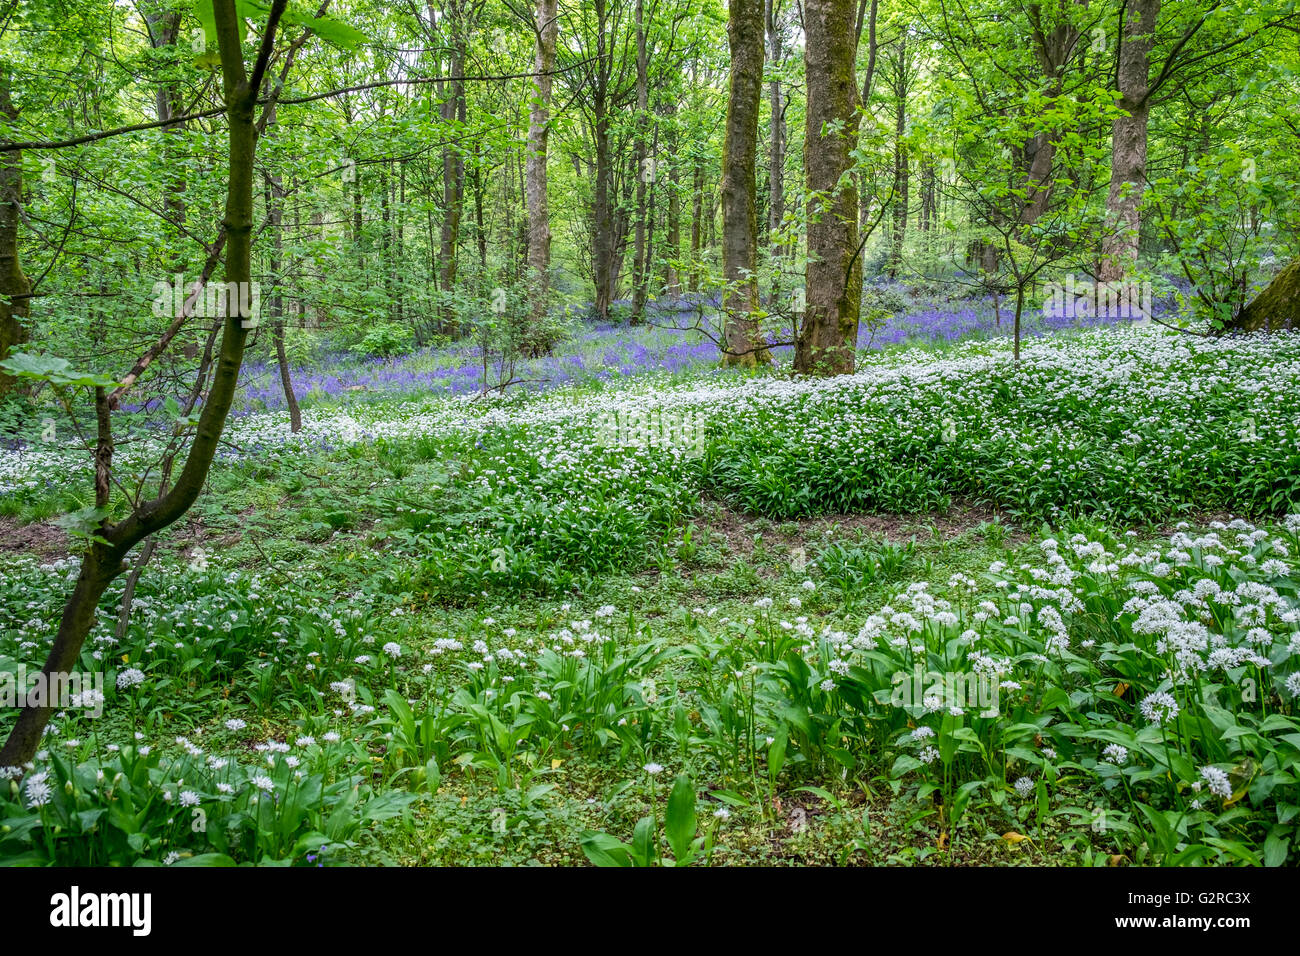 Wild Blue Bells and Wild Garlic in a growing in a field. Stock Photo